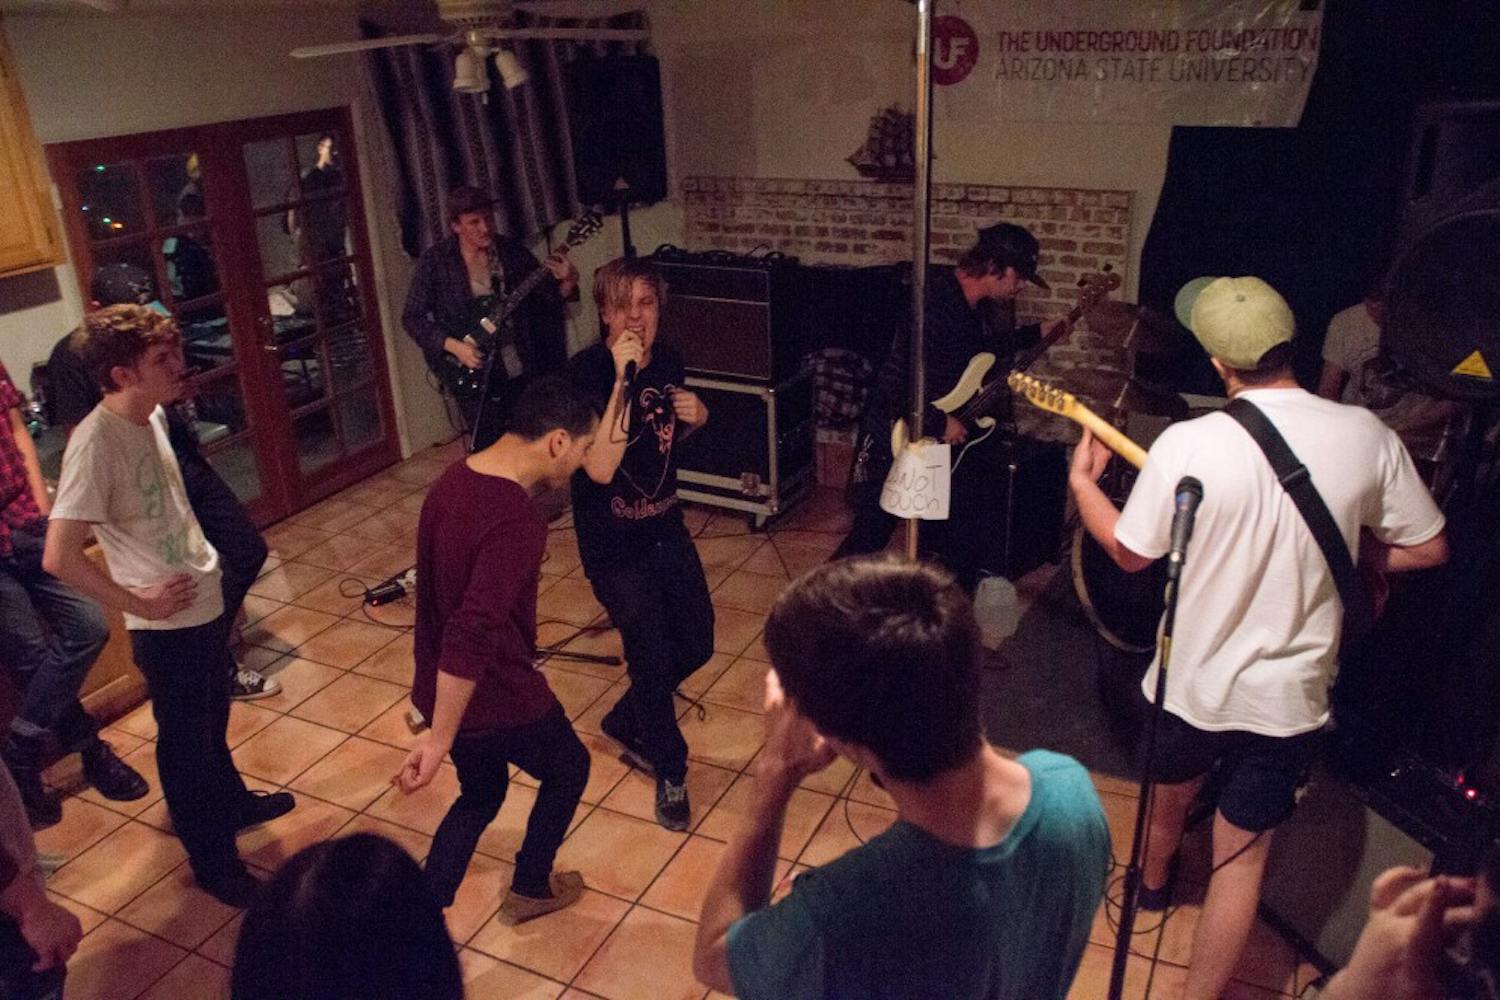 Local emotive punk band Sundressed plays to an enthusiastic audience at a house show put on by The Underground Foundation in Tempe, Arizona on March 19, 2016. The Underground Foundation is an Arizona State University club that puts on small venue concerts in and around ASU's tempe campus.